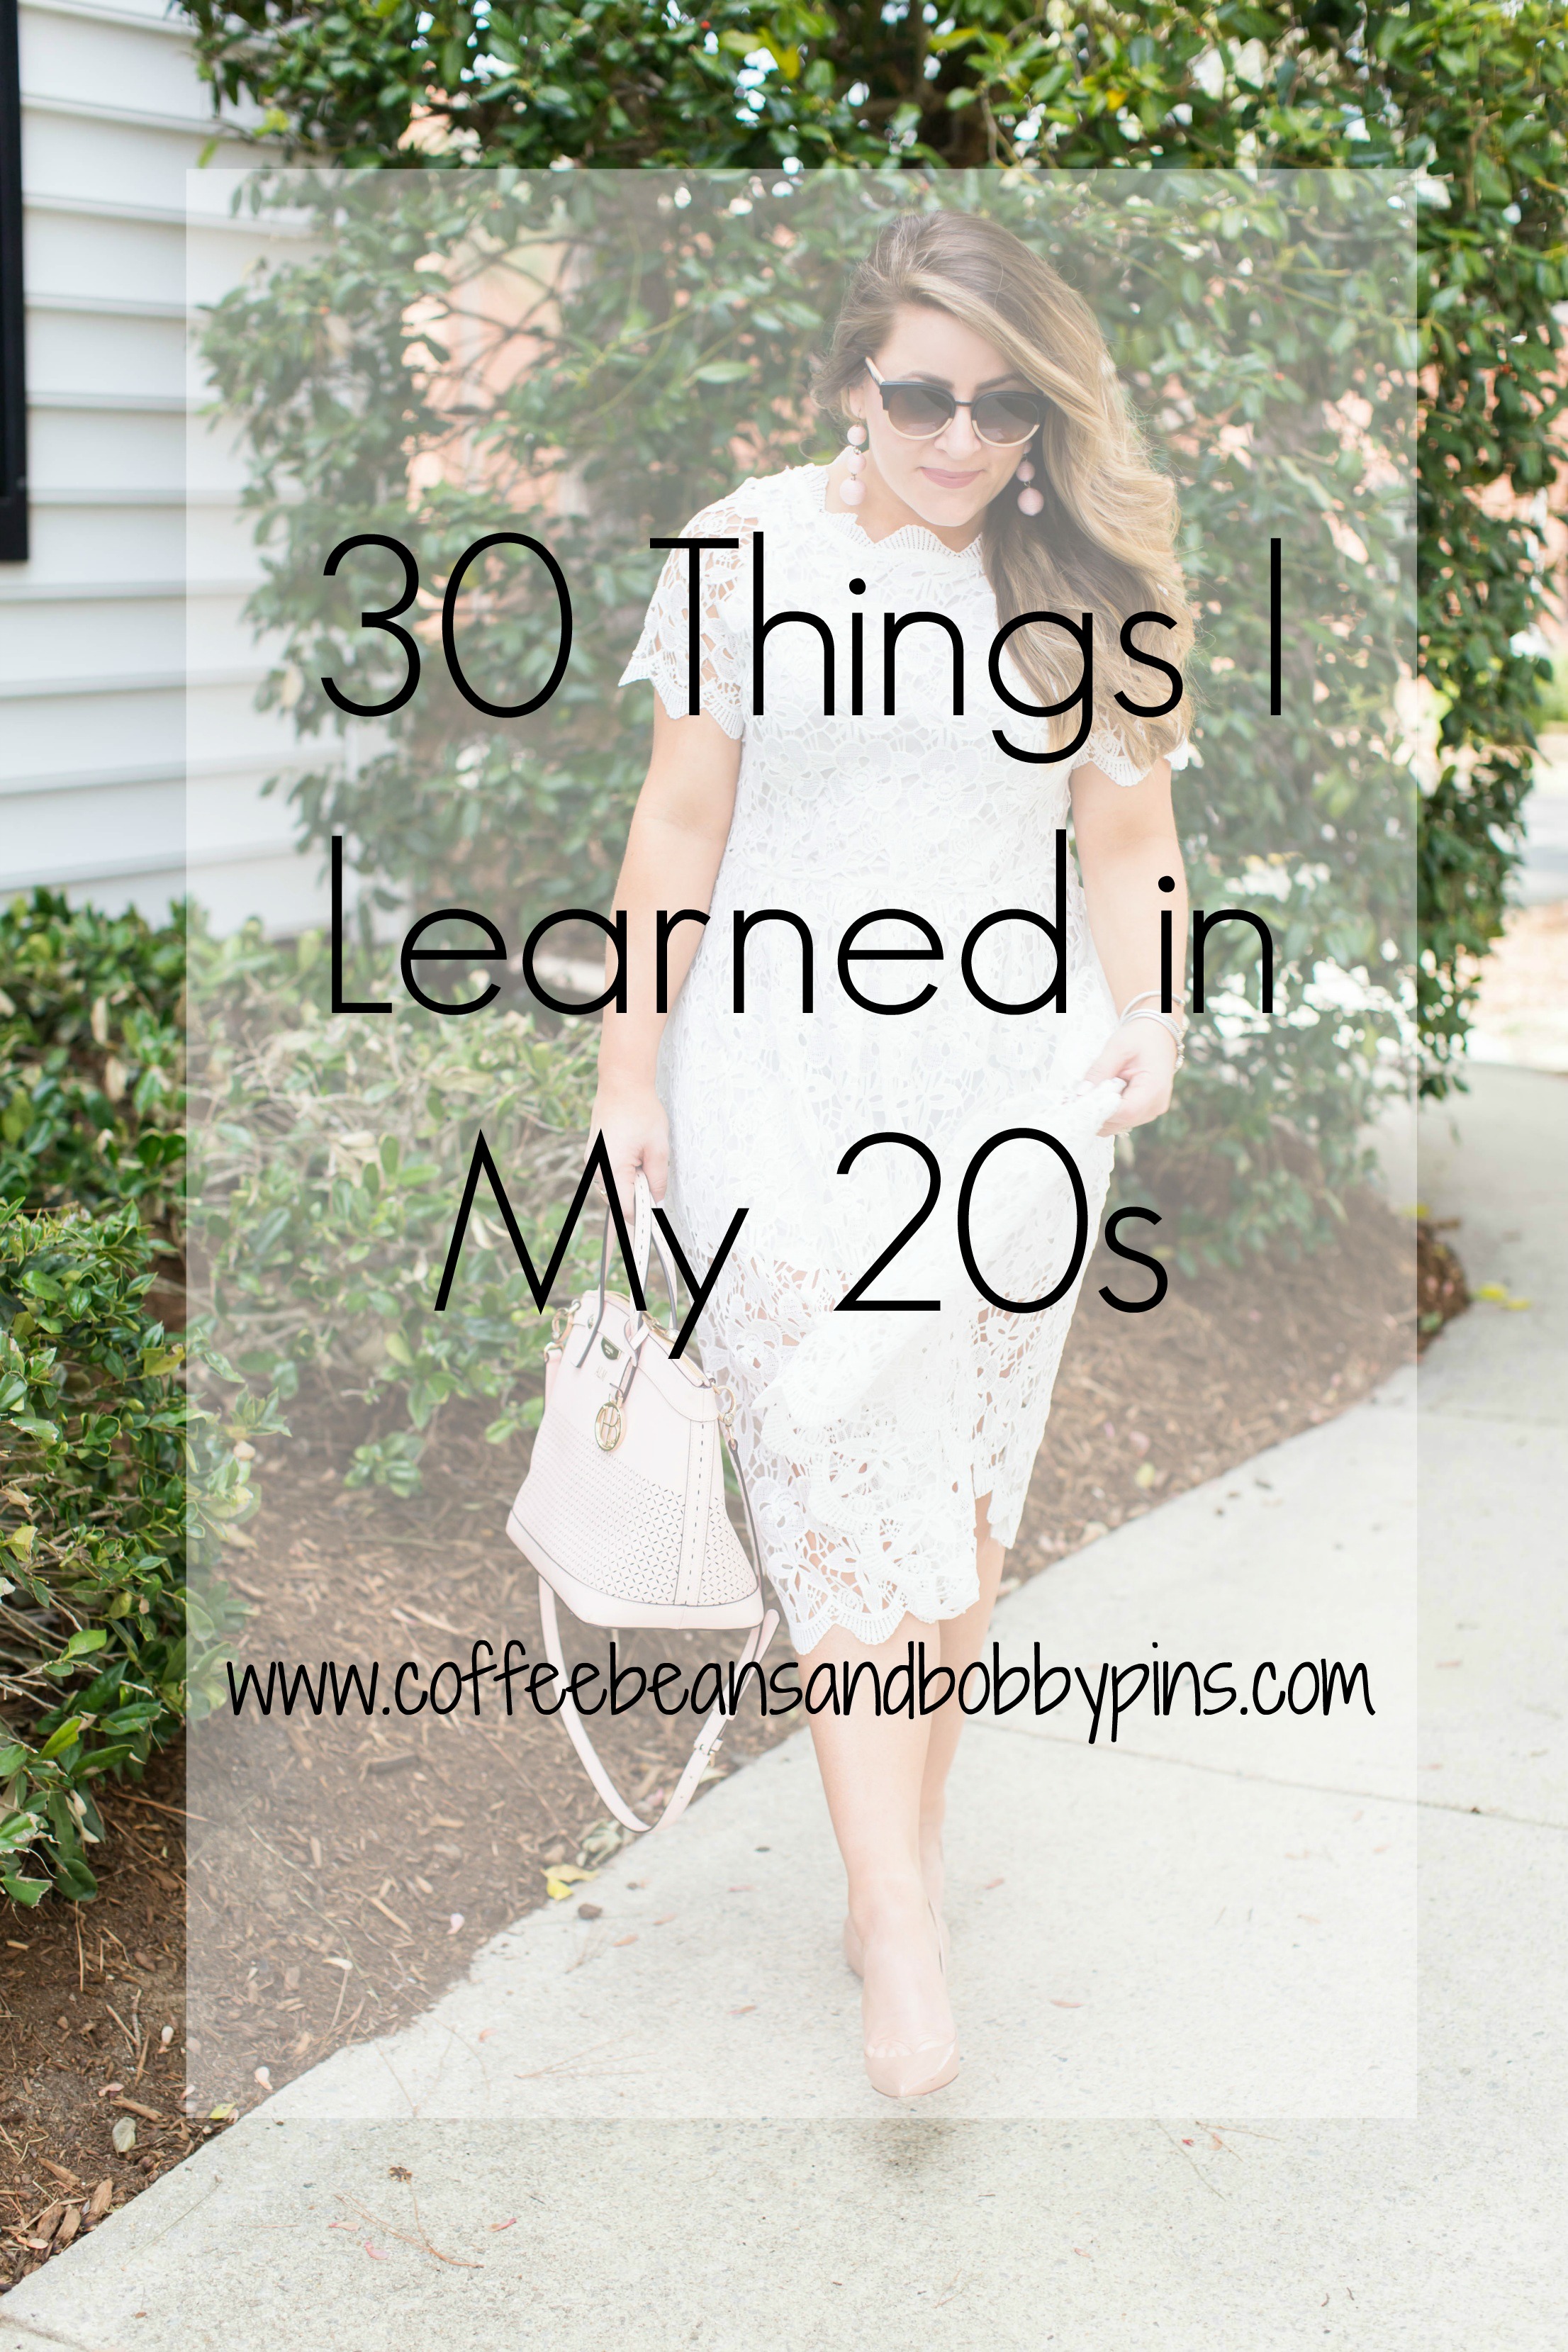 30 Things To Learn in Your 20s by lifestyle blogger Amy of Coffee Beans and Bobby Pins